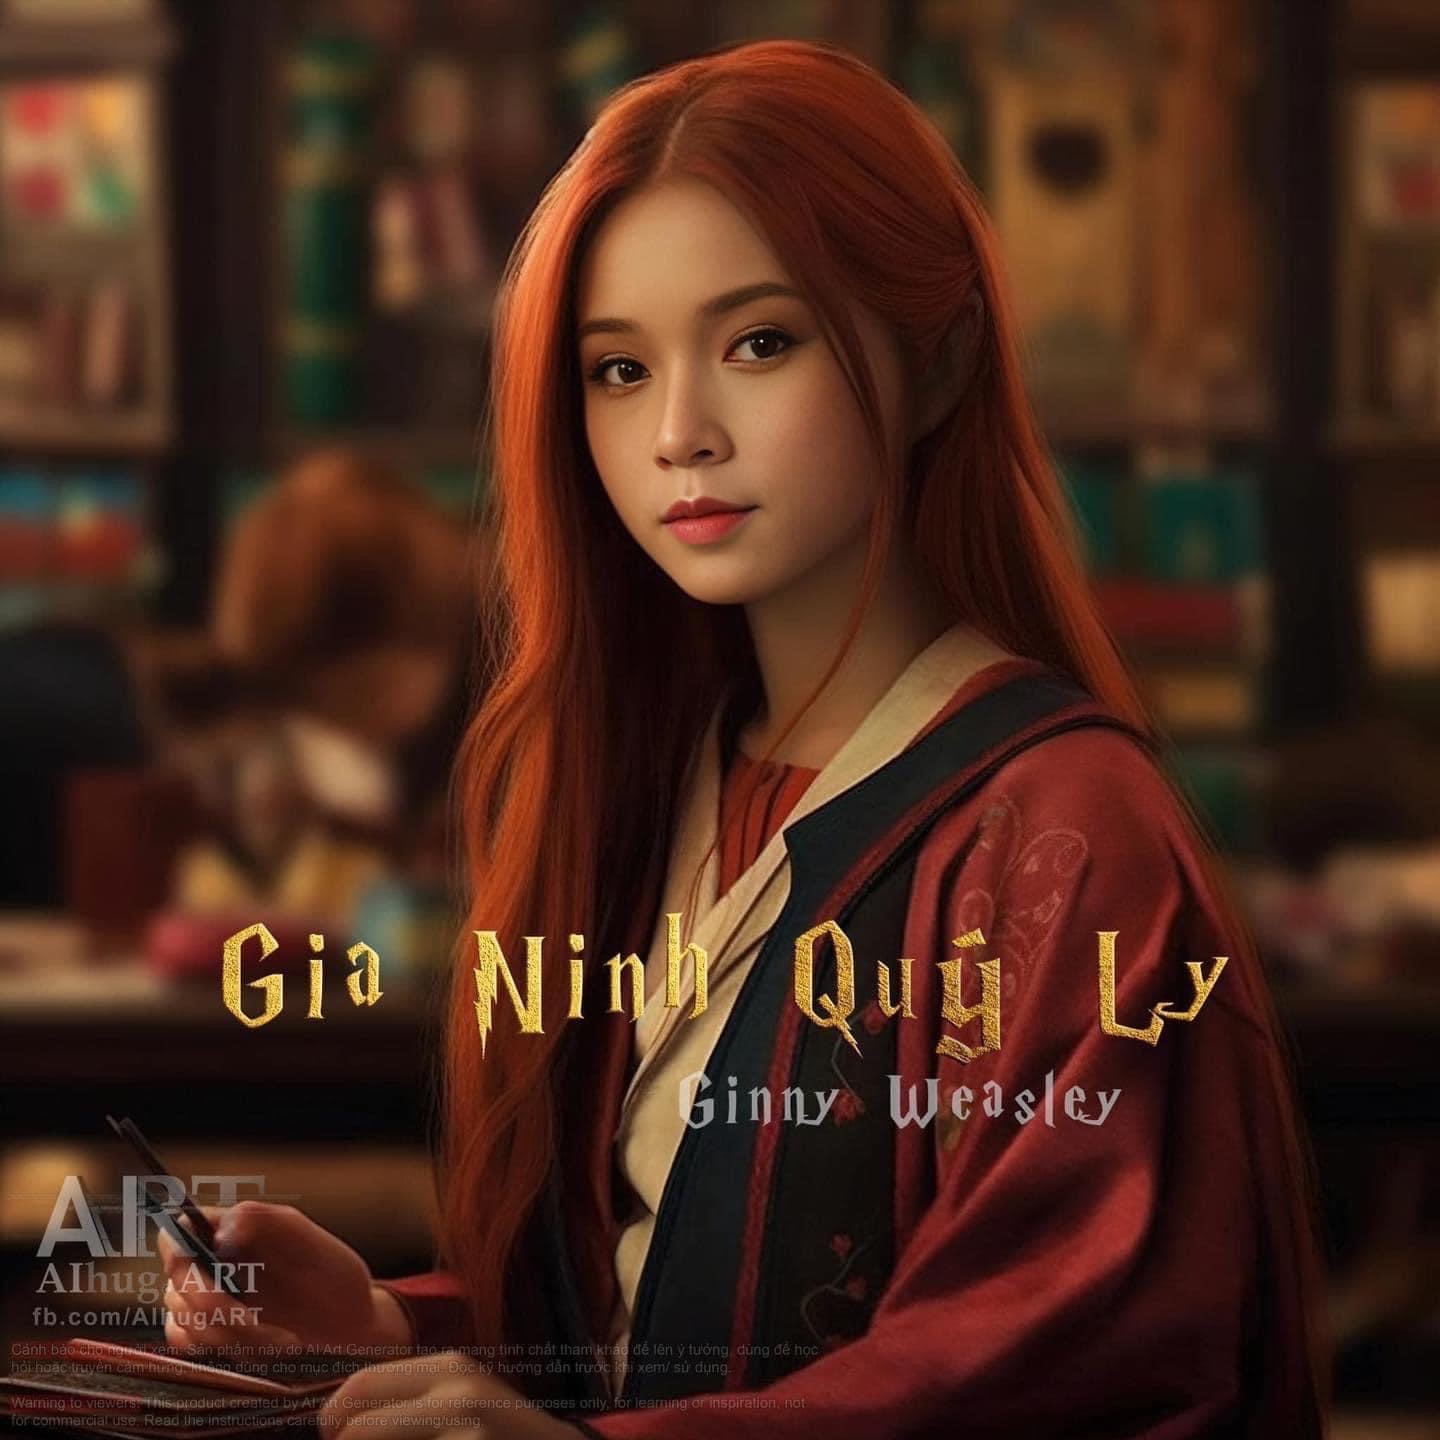 The Vietnamese version of Harry Potter characters causes a fever, everyone is ranked in beauty except for the male lead - Photo 15.